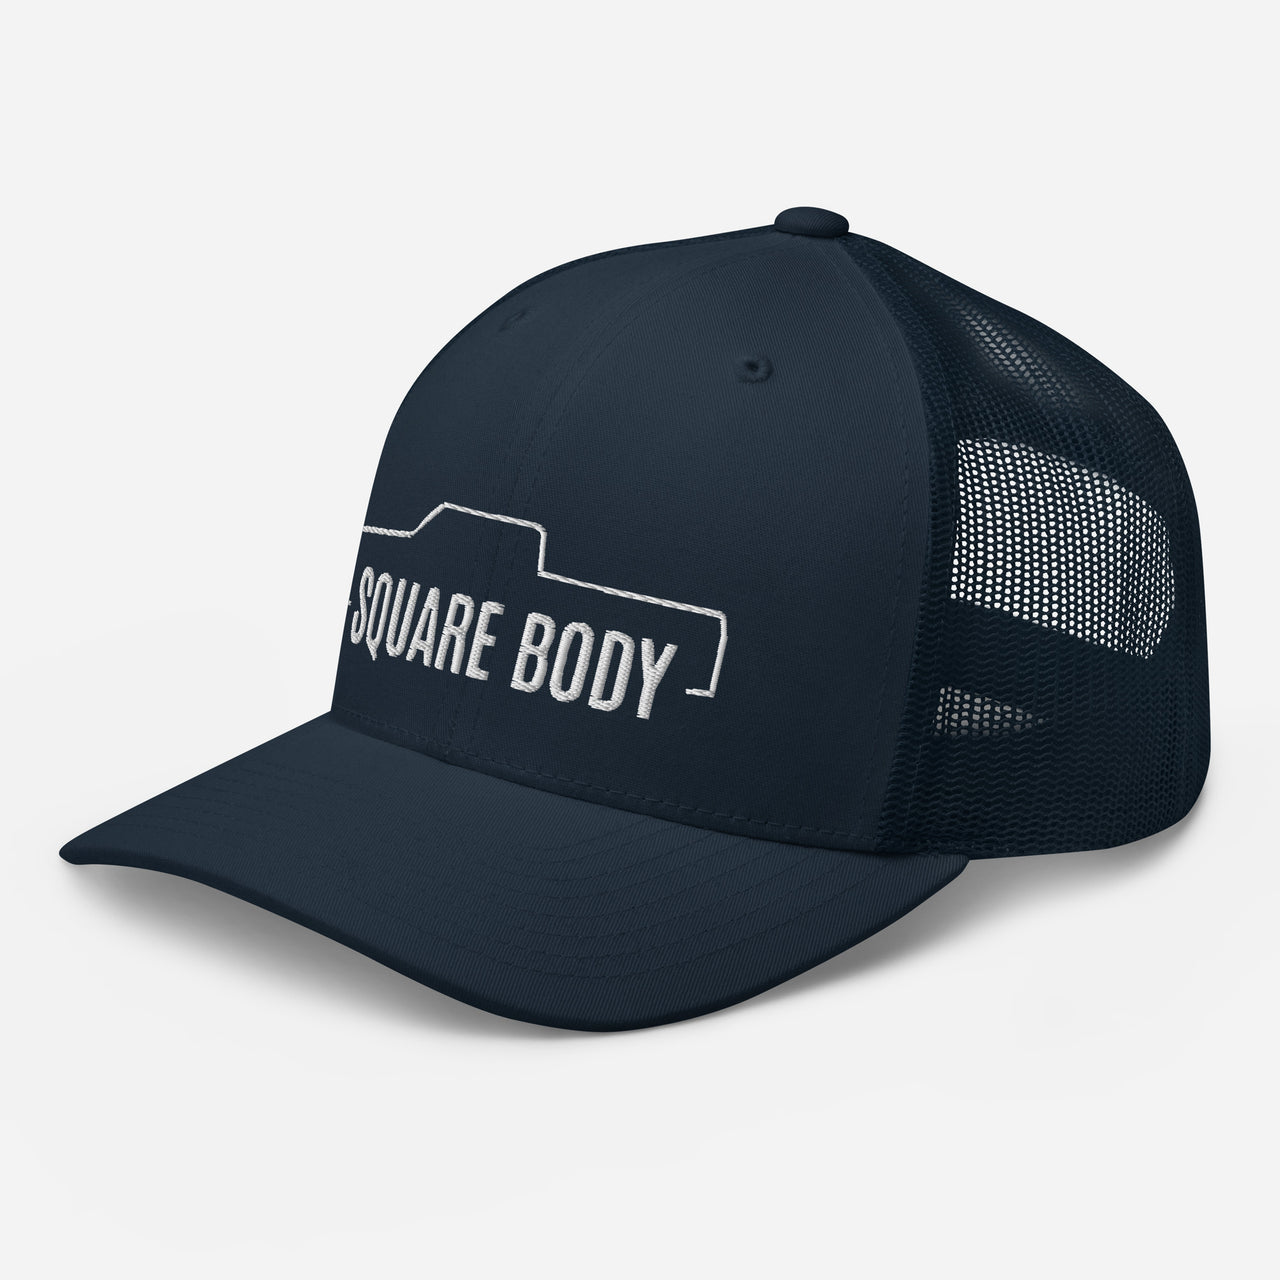 3/4 view of Crew Cab Square Body Trucker Hat From Aggressive Thread in Navy